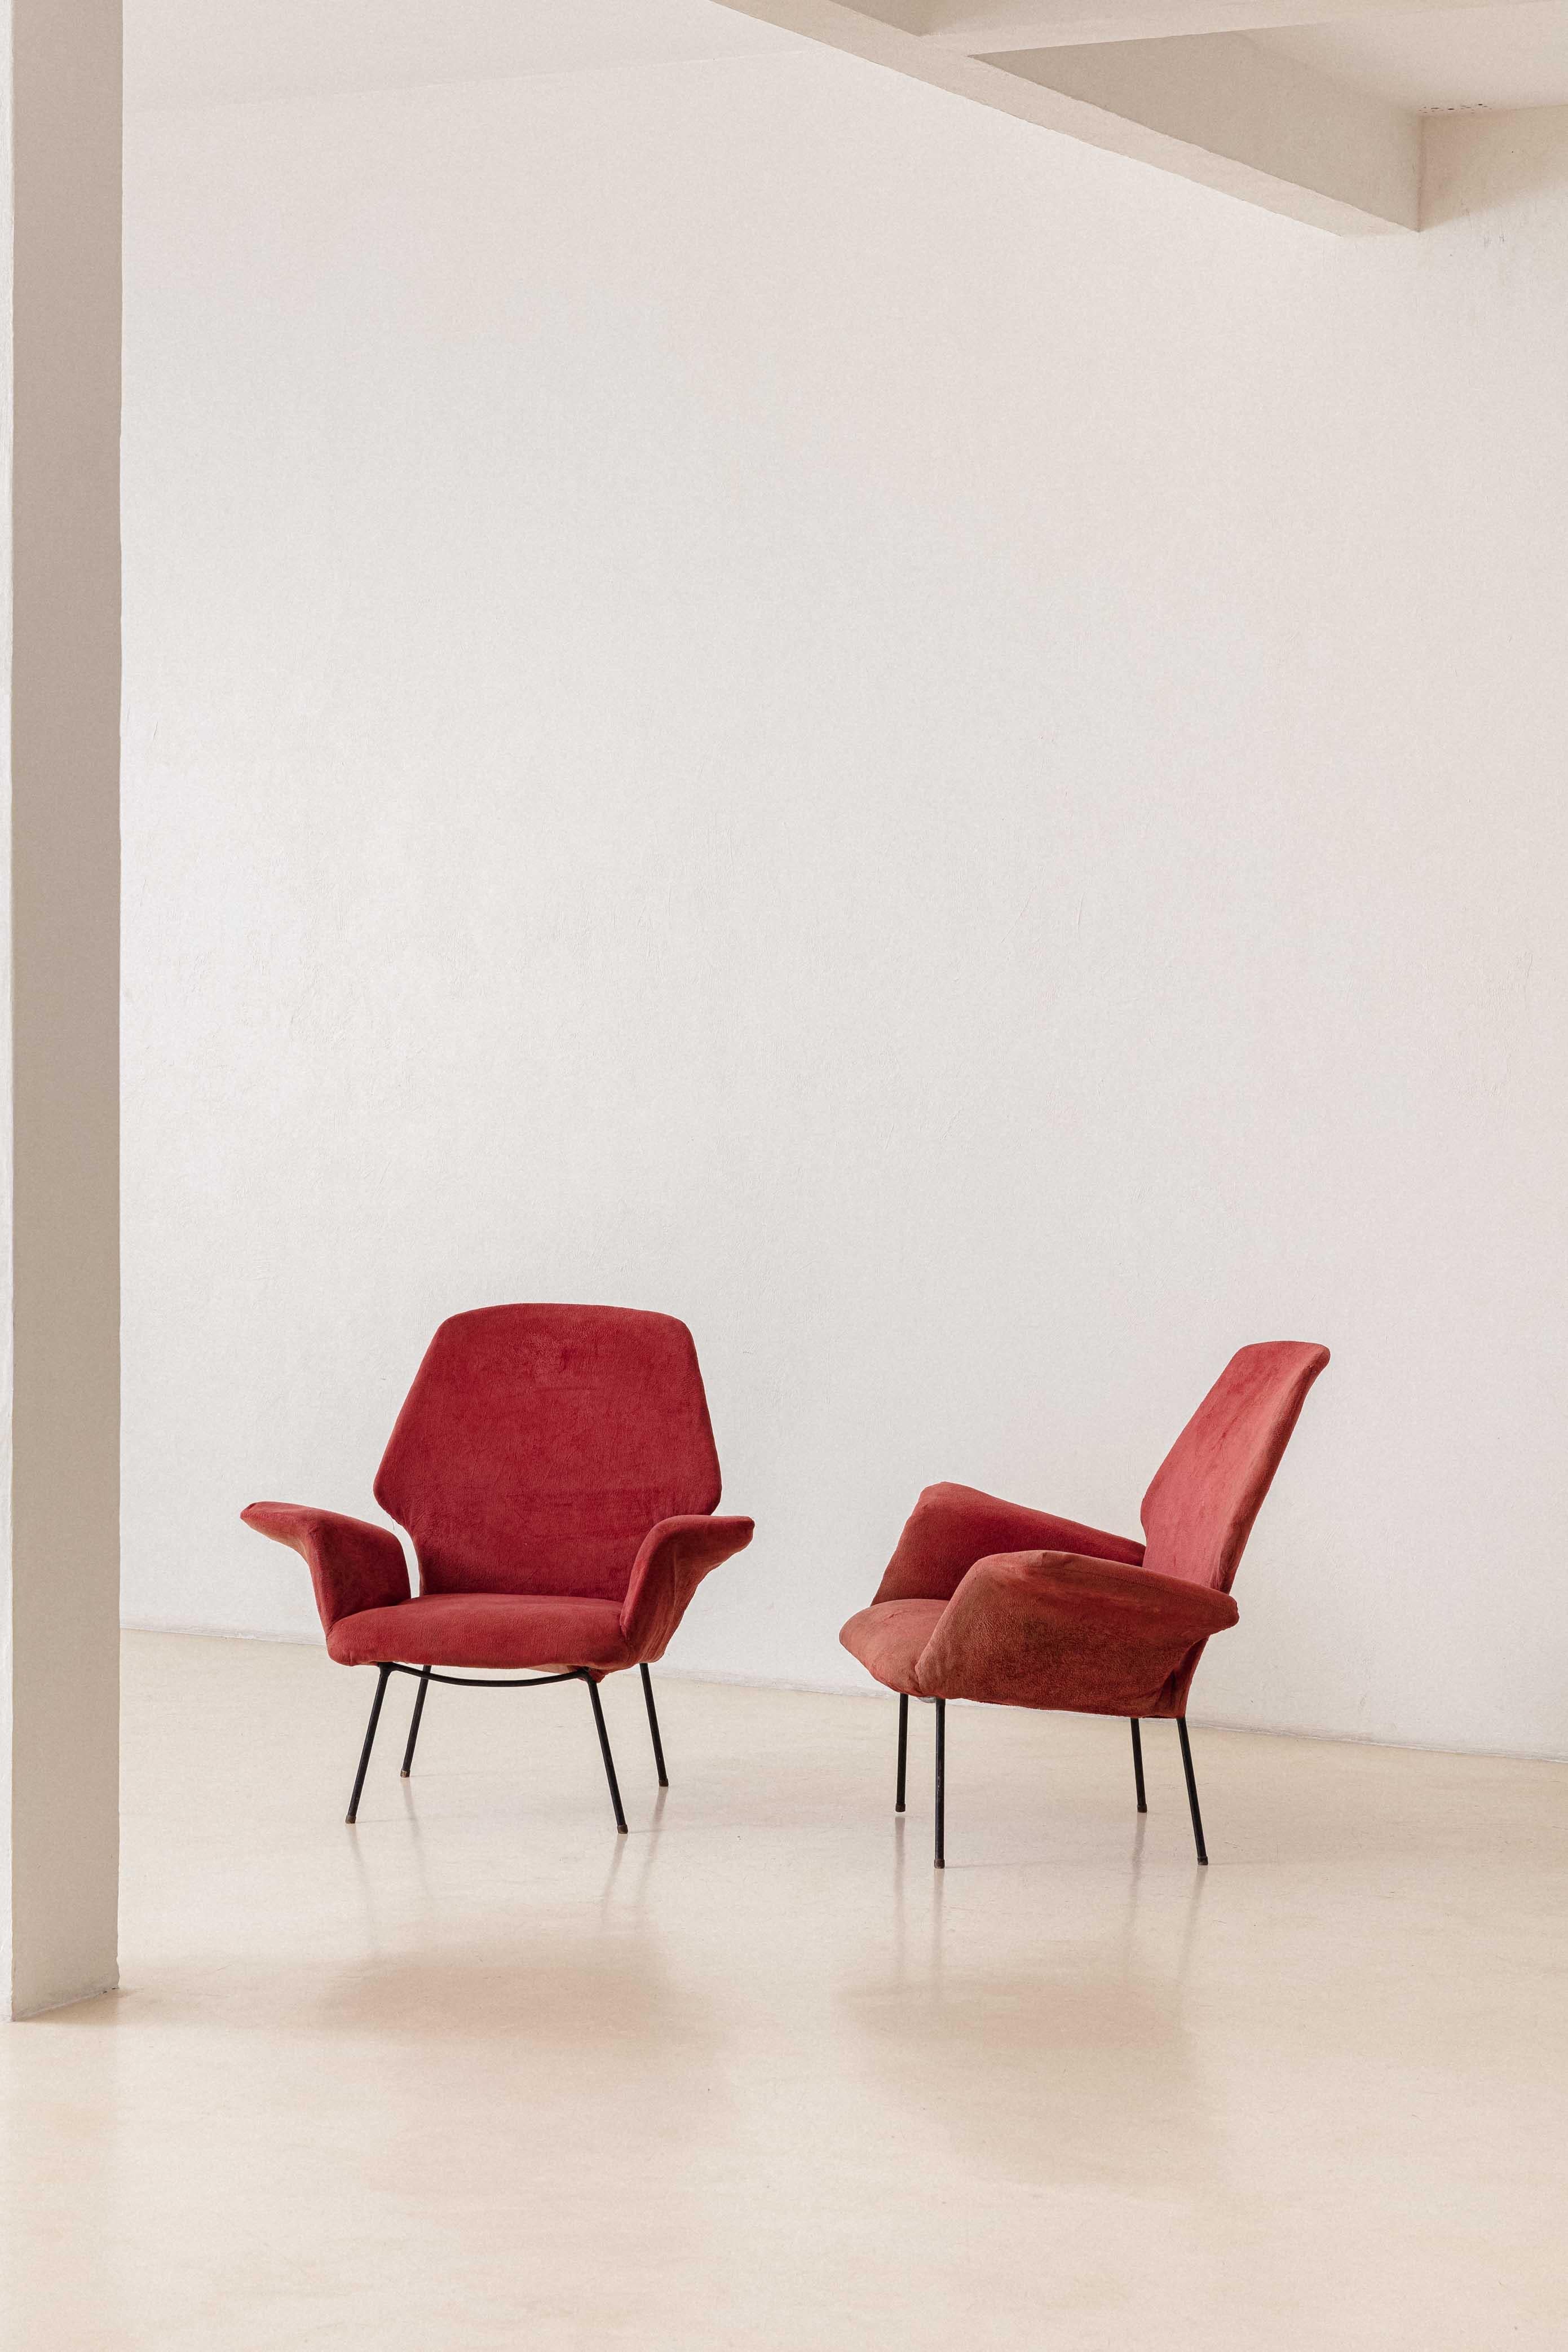 This stunning armchair was produced by the Brazilian Forma S.A. Móveis e Objetos de Arte in the 1950s, a company directed by Carlo Hauner and Martin Eisler. The piece is made of an iron structure and upholstered seats and backrests.

This singular